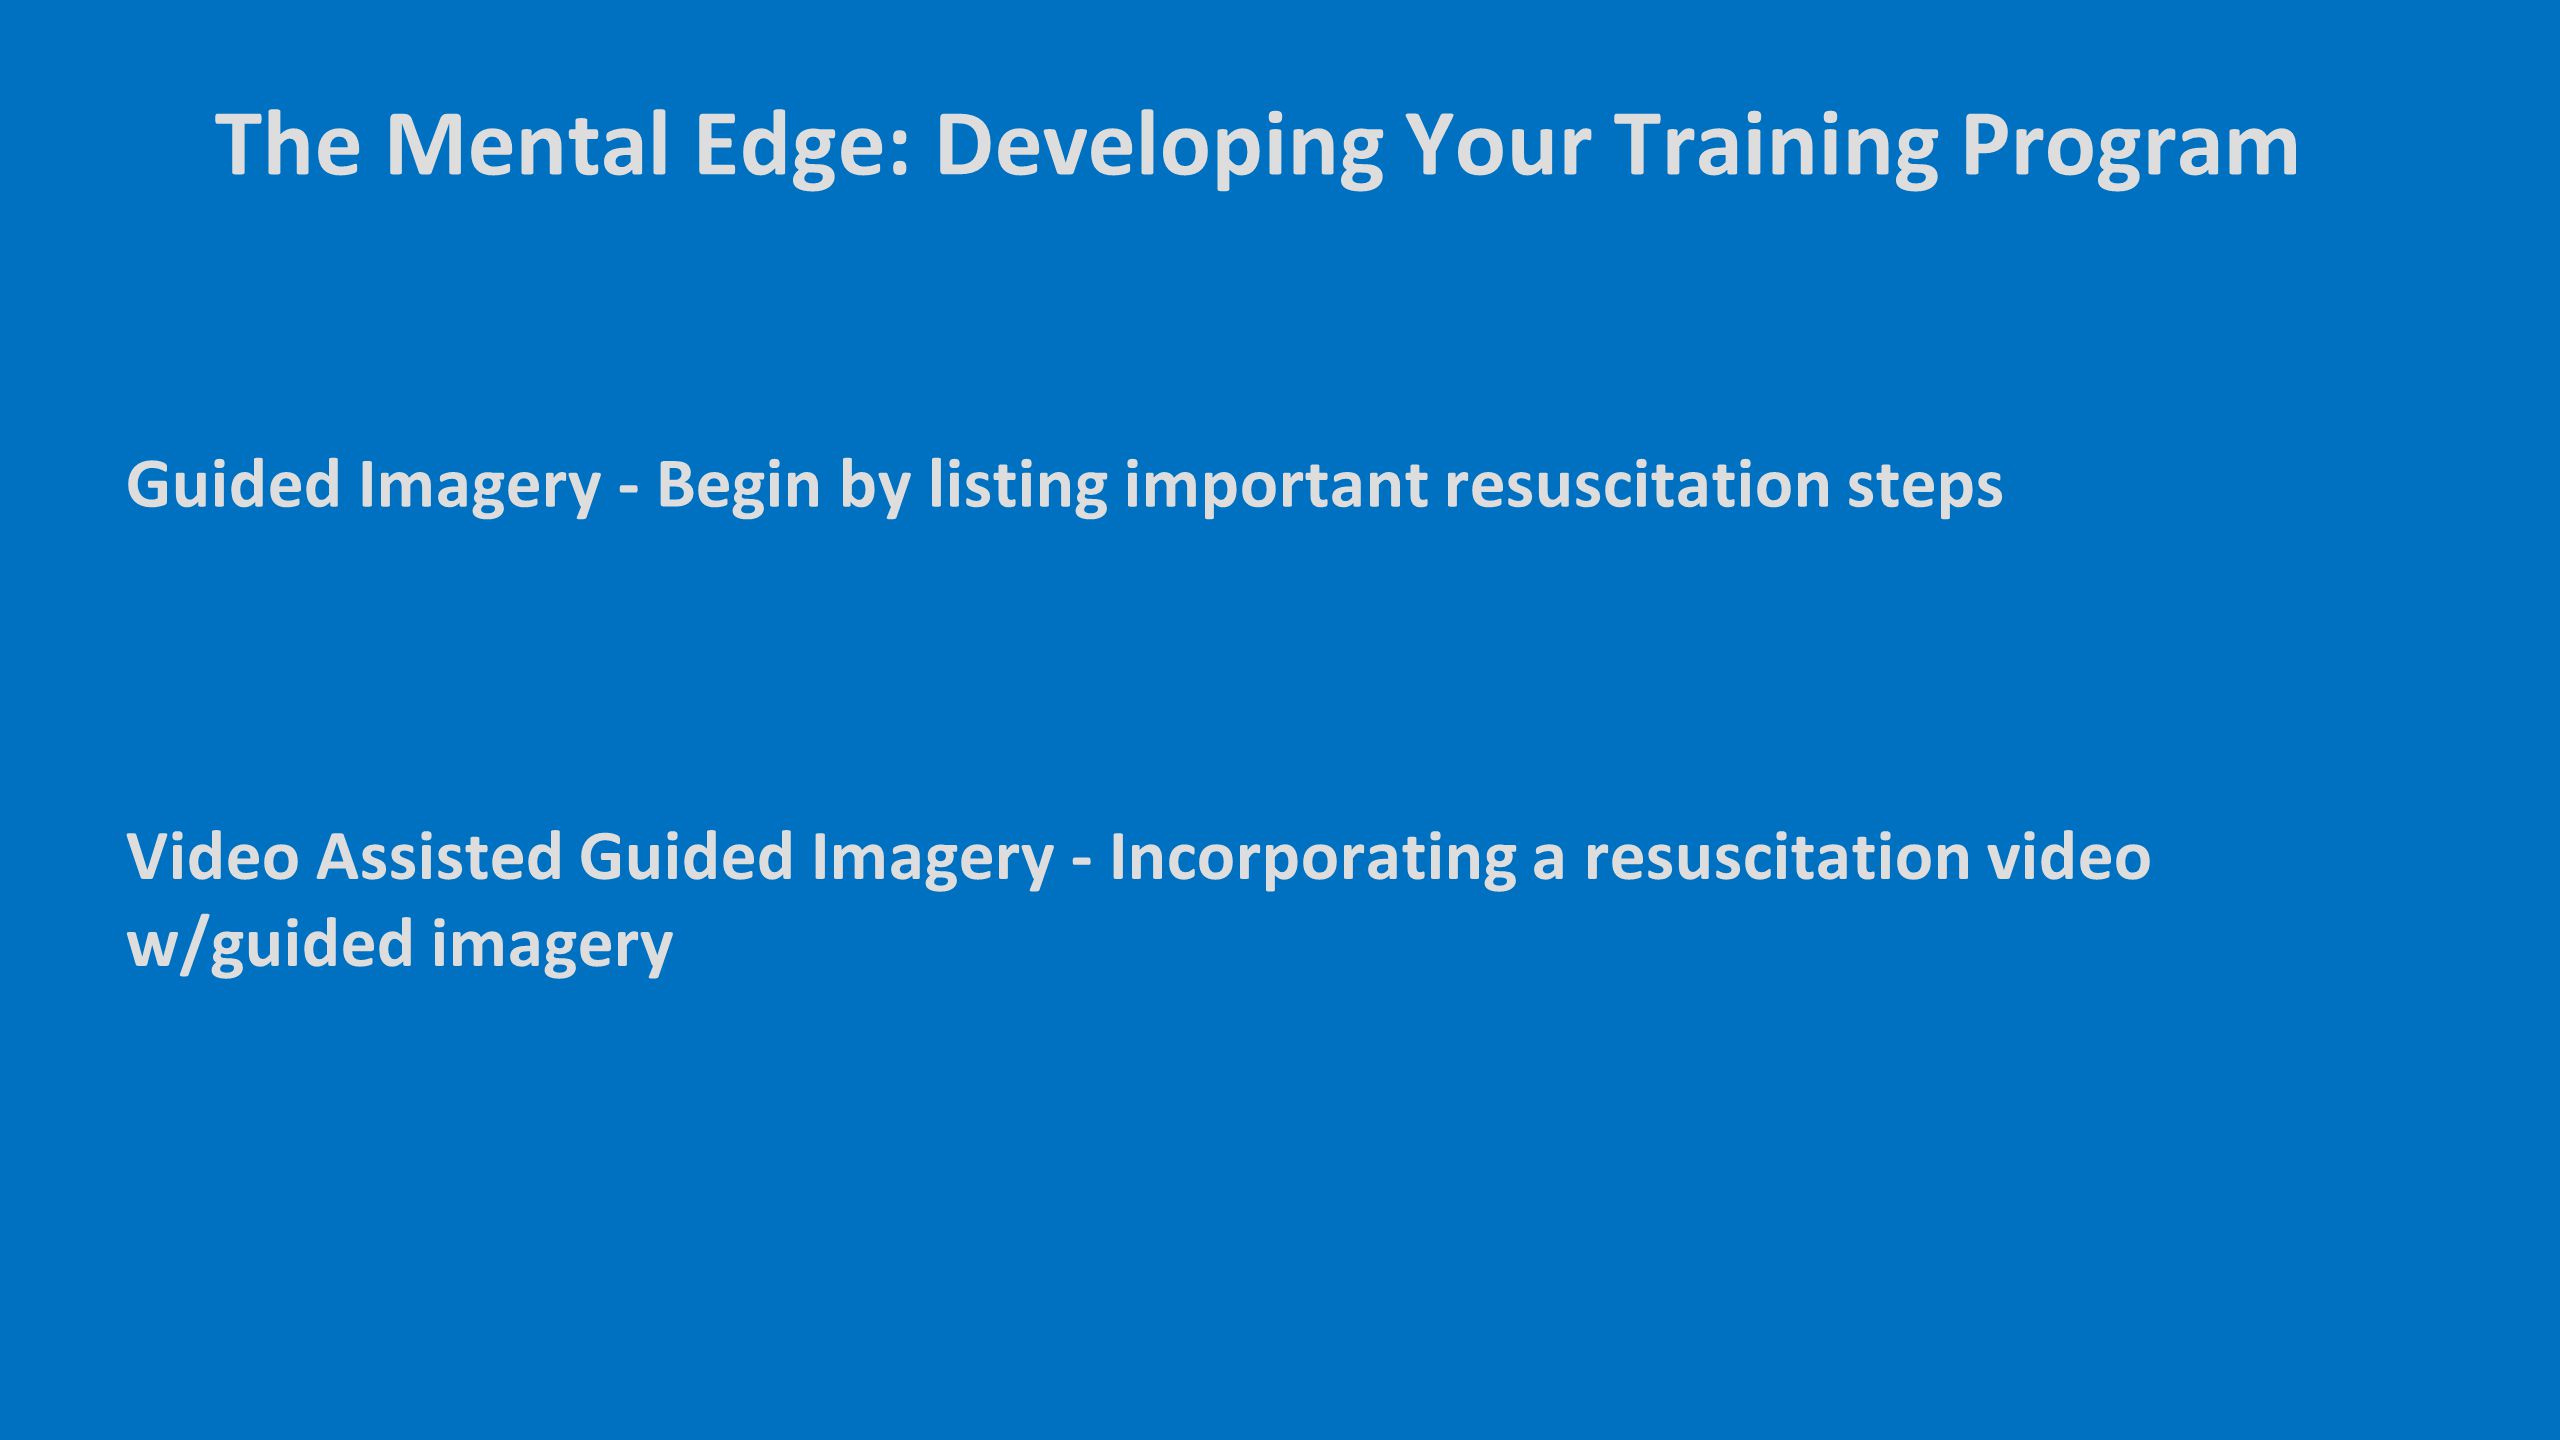 Guided Imagery - Begin by listing important resuscitation steps The Mental Edge: Developing Your Training Program Video Assisted Guided Imagery - Incorporating a resuscitation video w/guided imagery